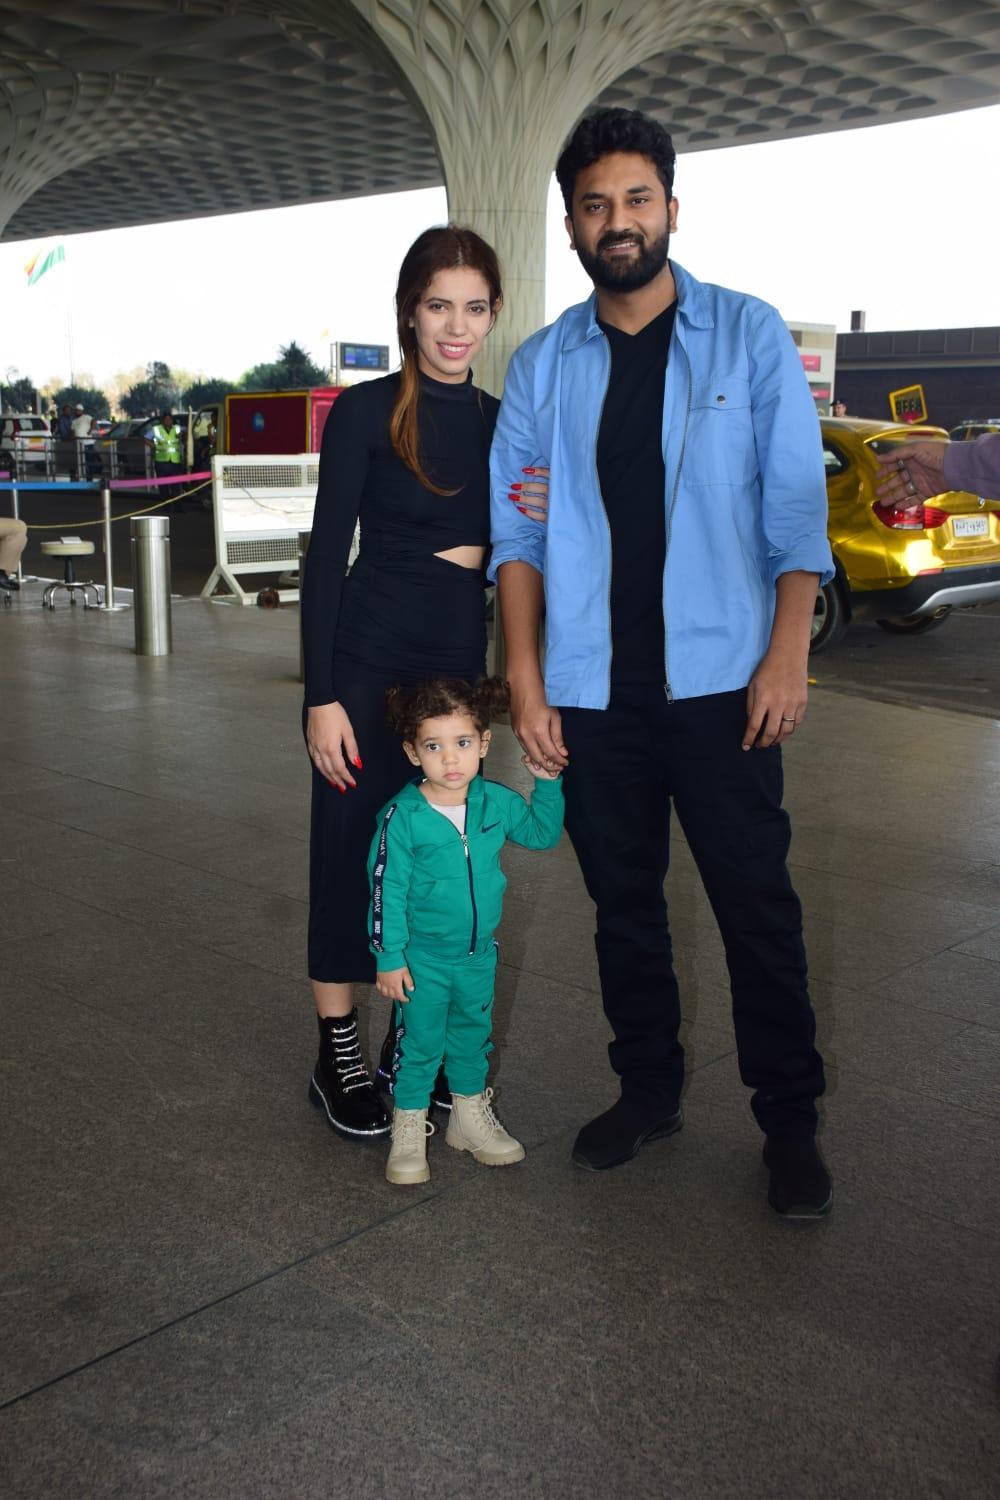 Bigg Boss fame Arun was snapped at the airport as he jetted off with his family